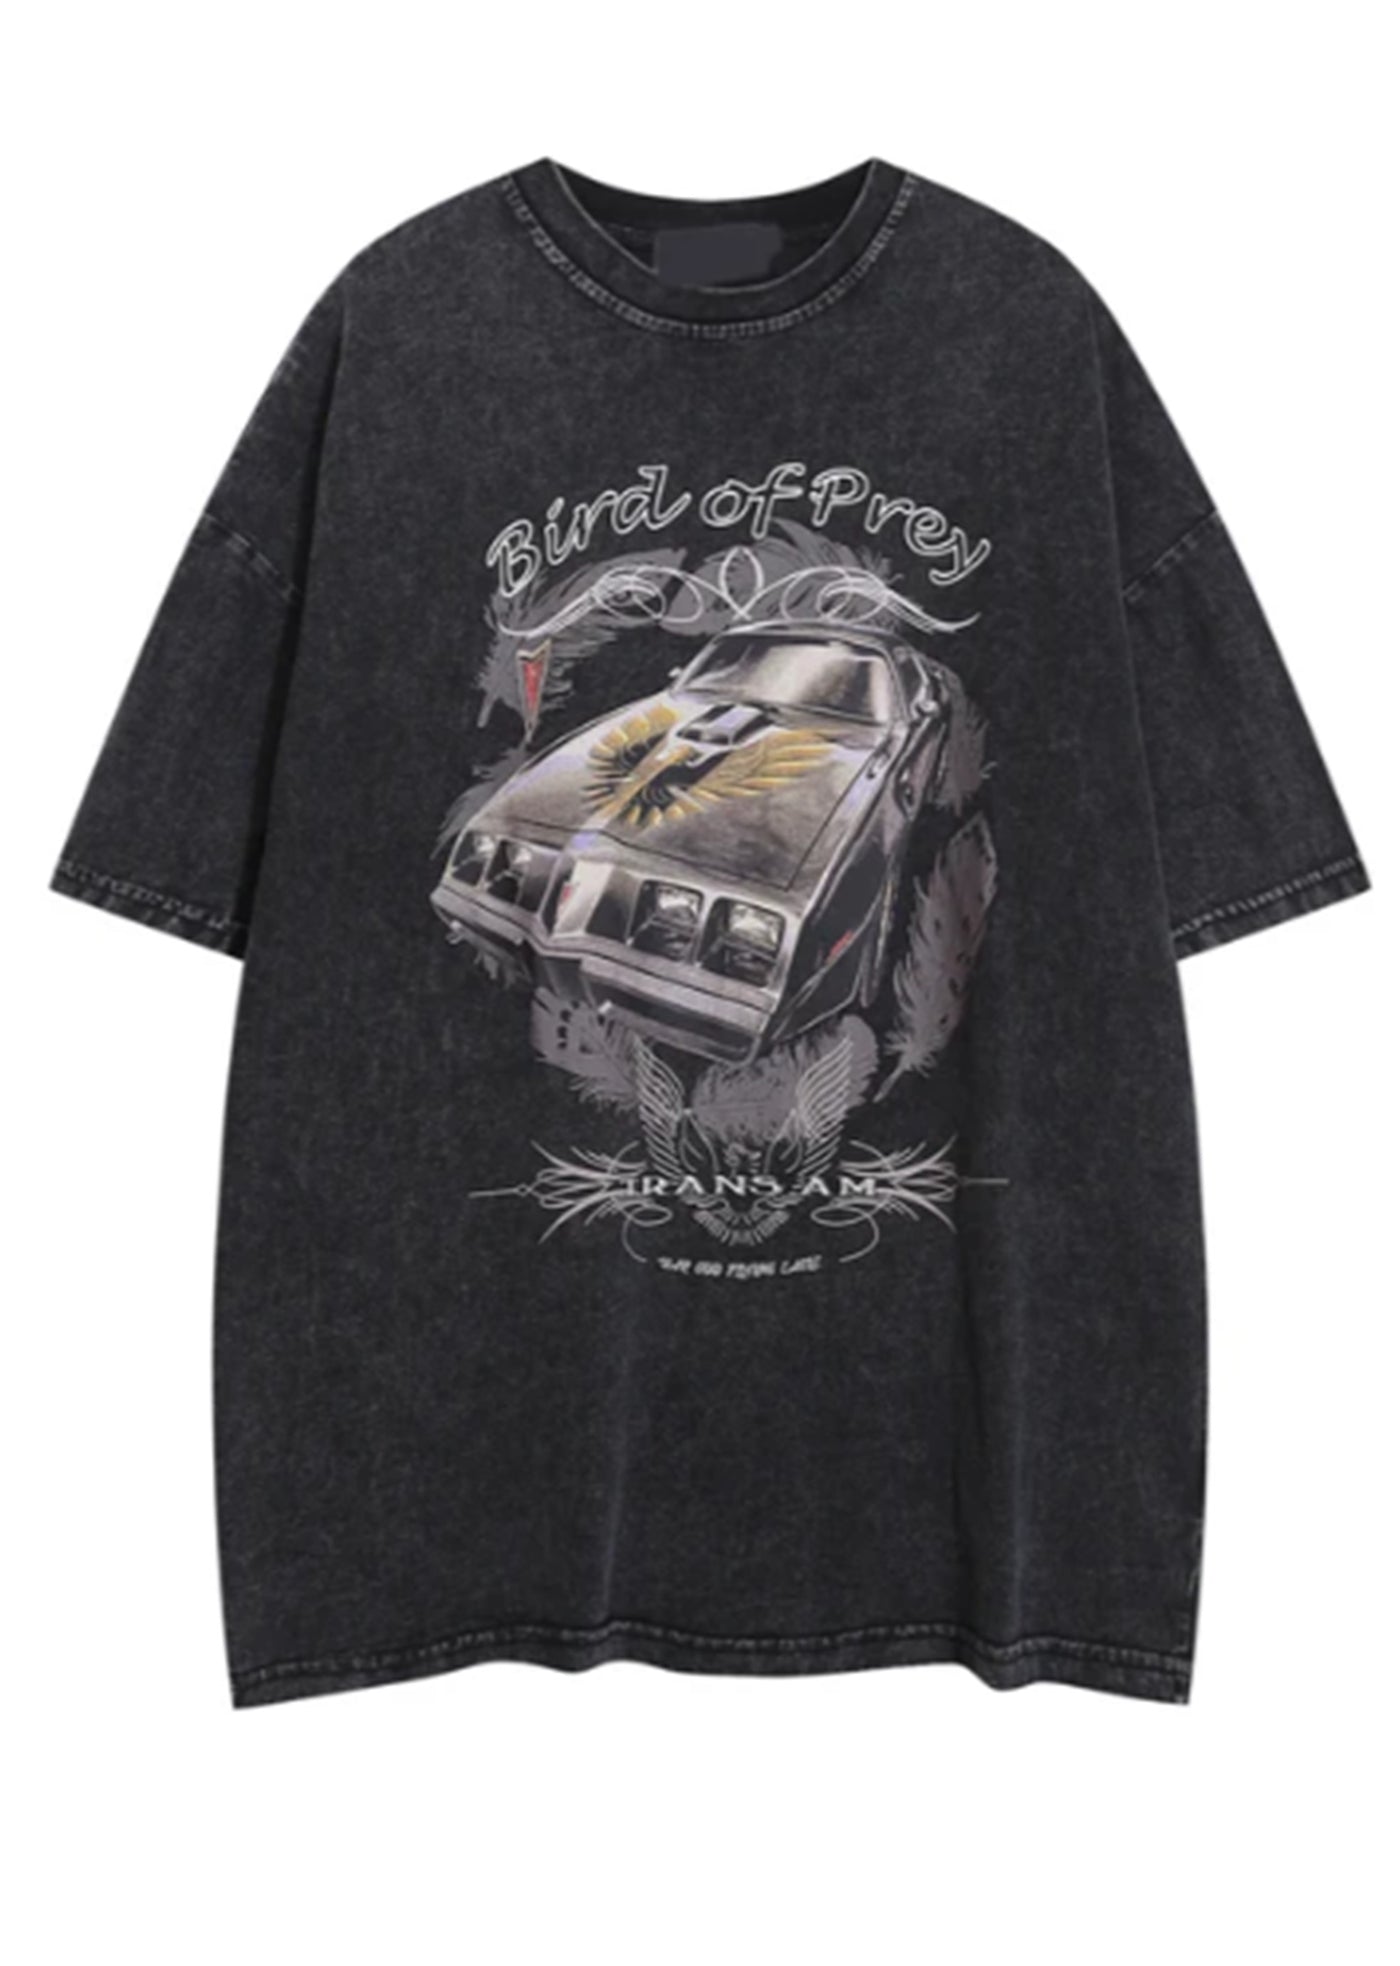 【H GANG X】Dull American casual style illustration design over silhouette short sleeve T-shirt  HX0033